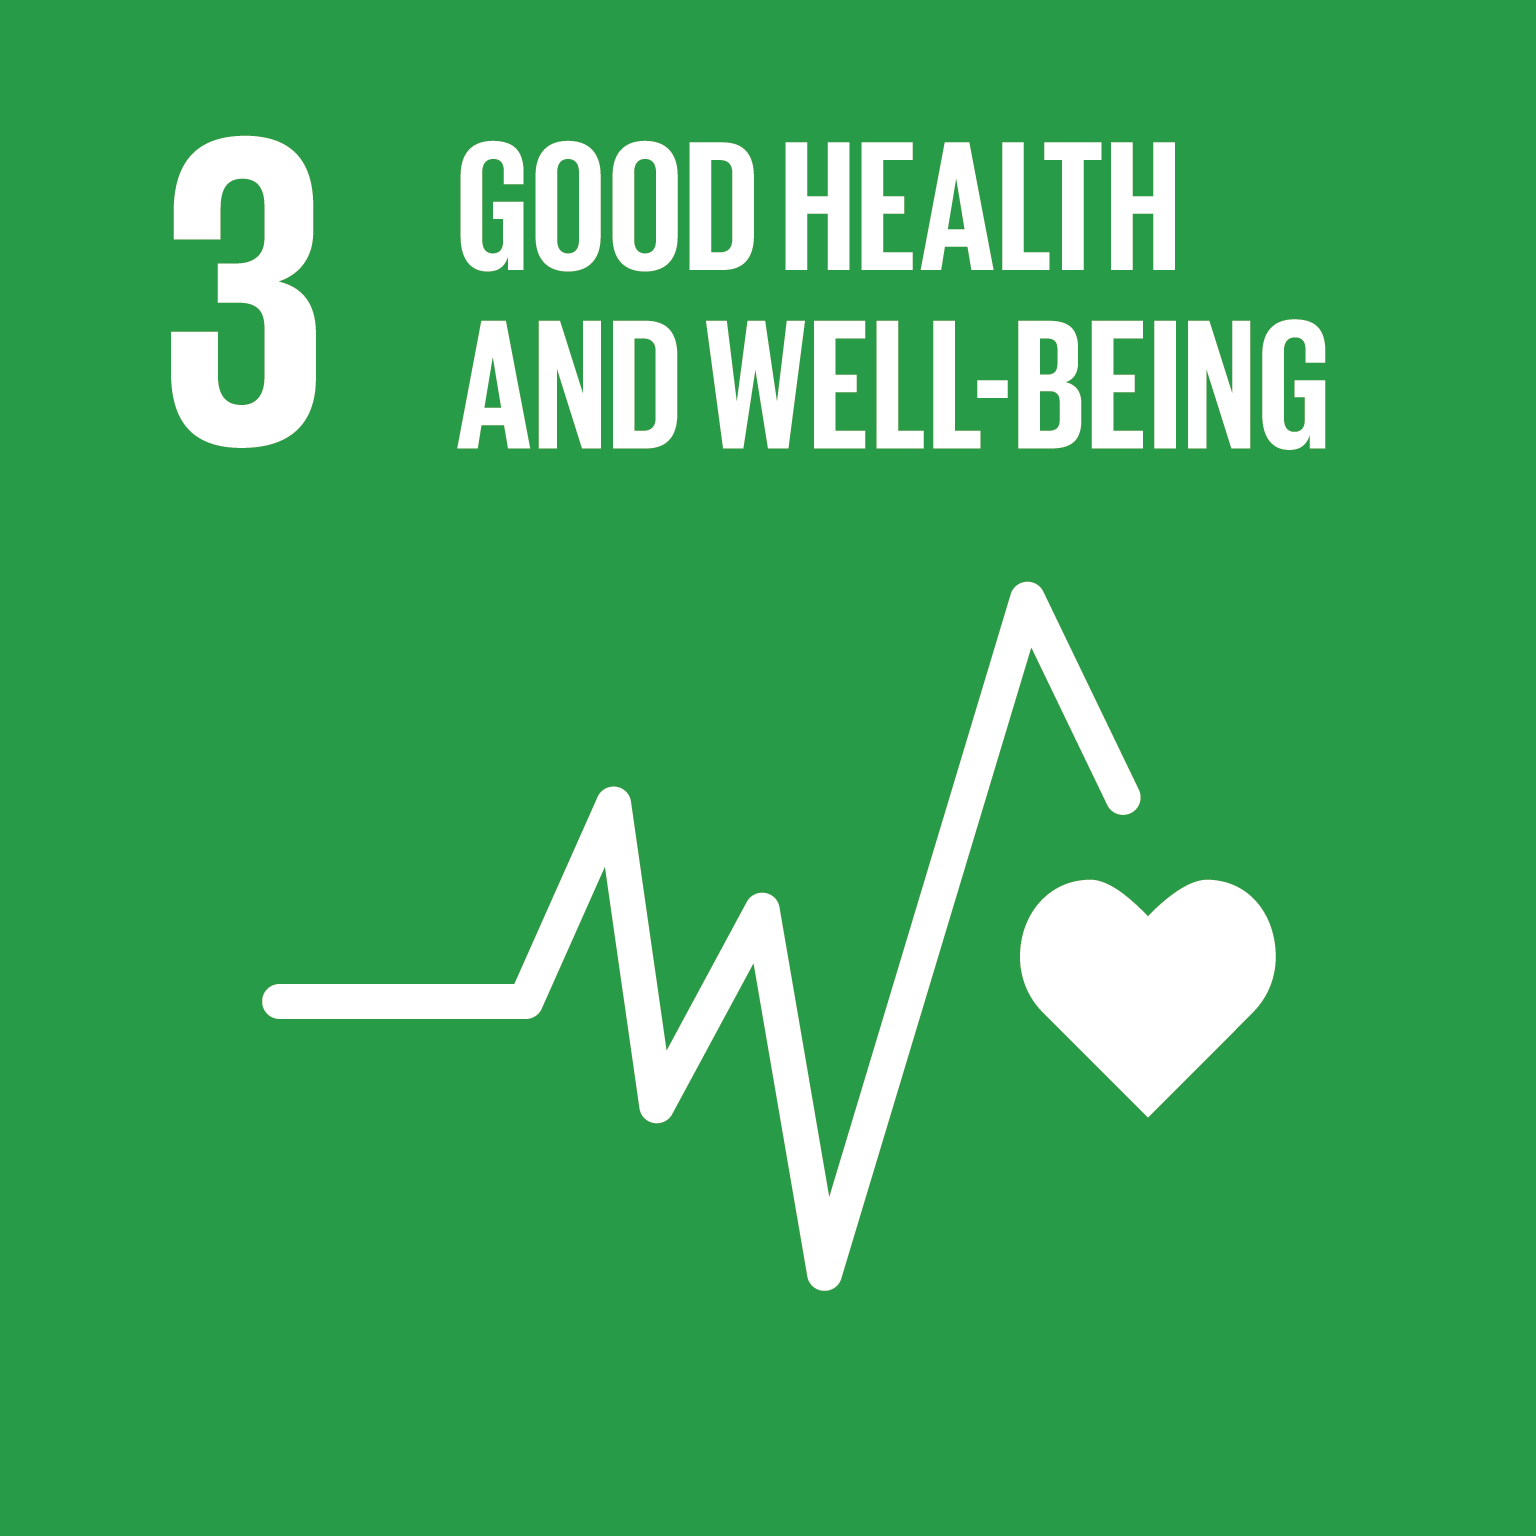 Goal 3: Good Health And Well-Being, the text of this infographic is listed below